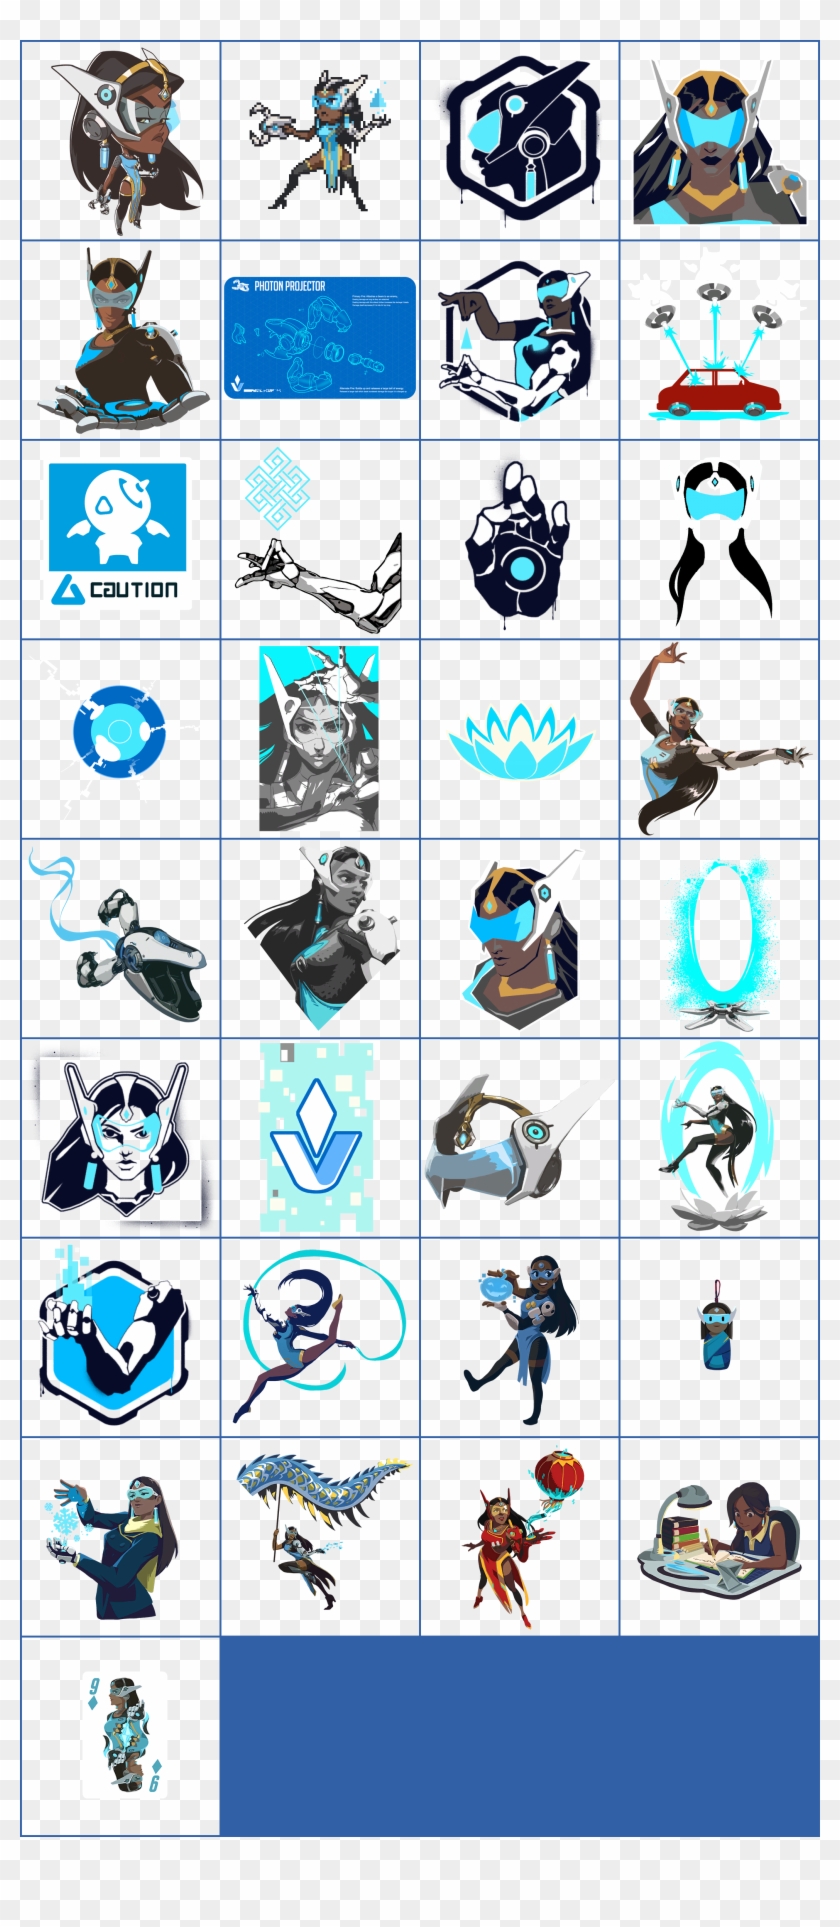 Click For Full Sized Image Symmetra - Overwatch Symmetra Logo Png Clipart #5567674